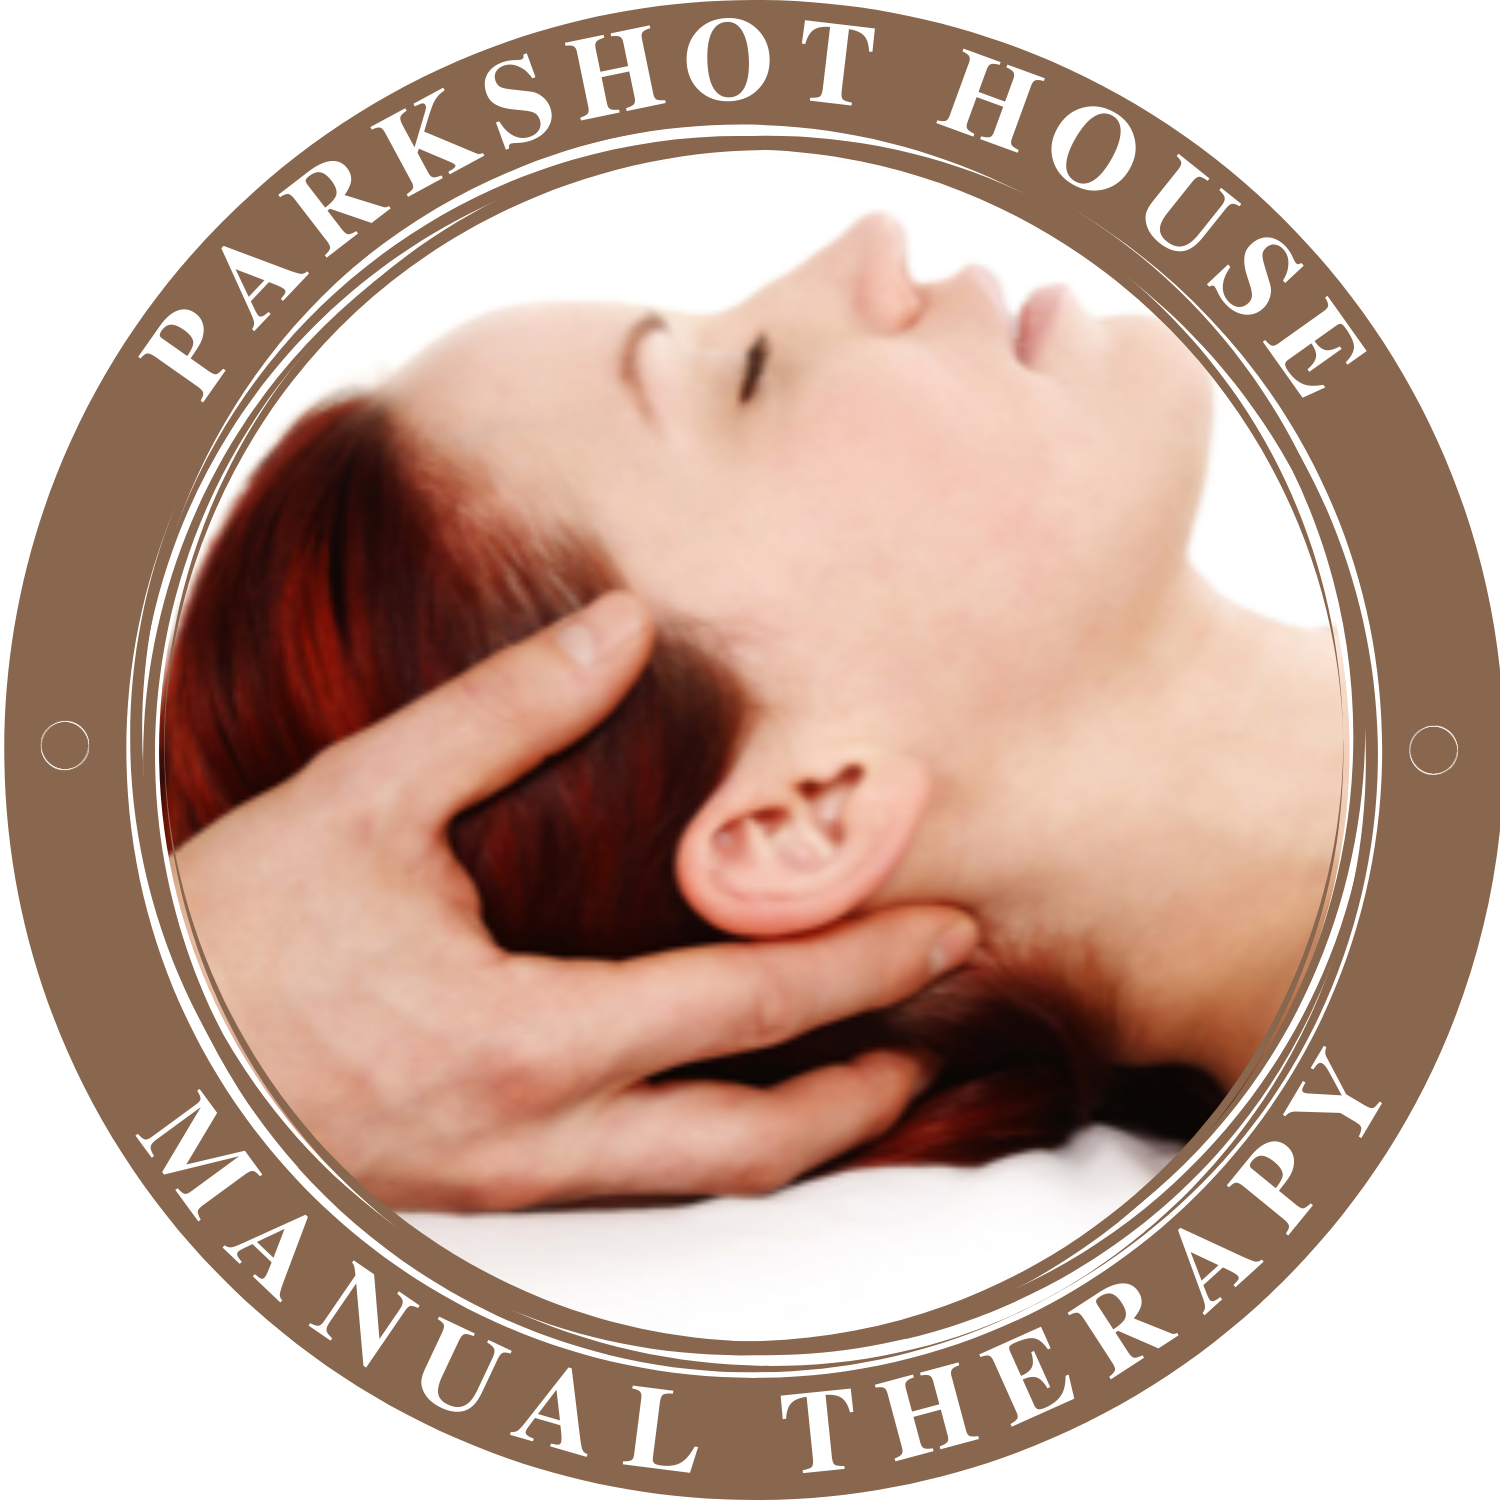 Parkshot House Manual Therapy logo